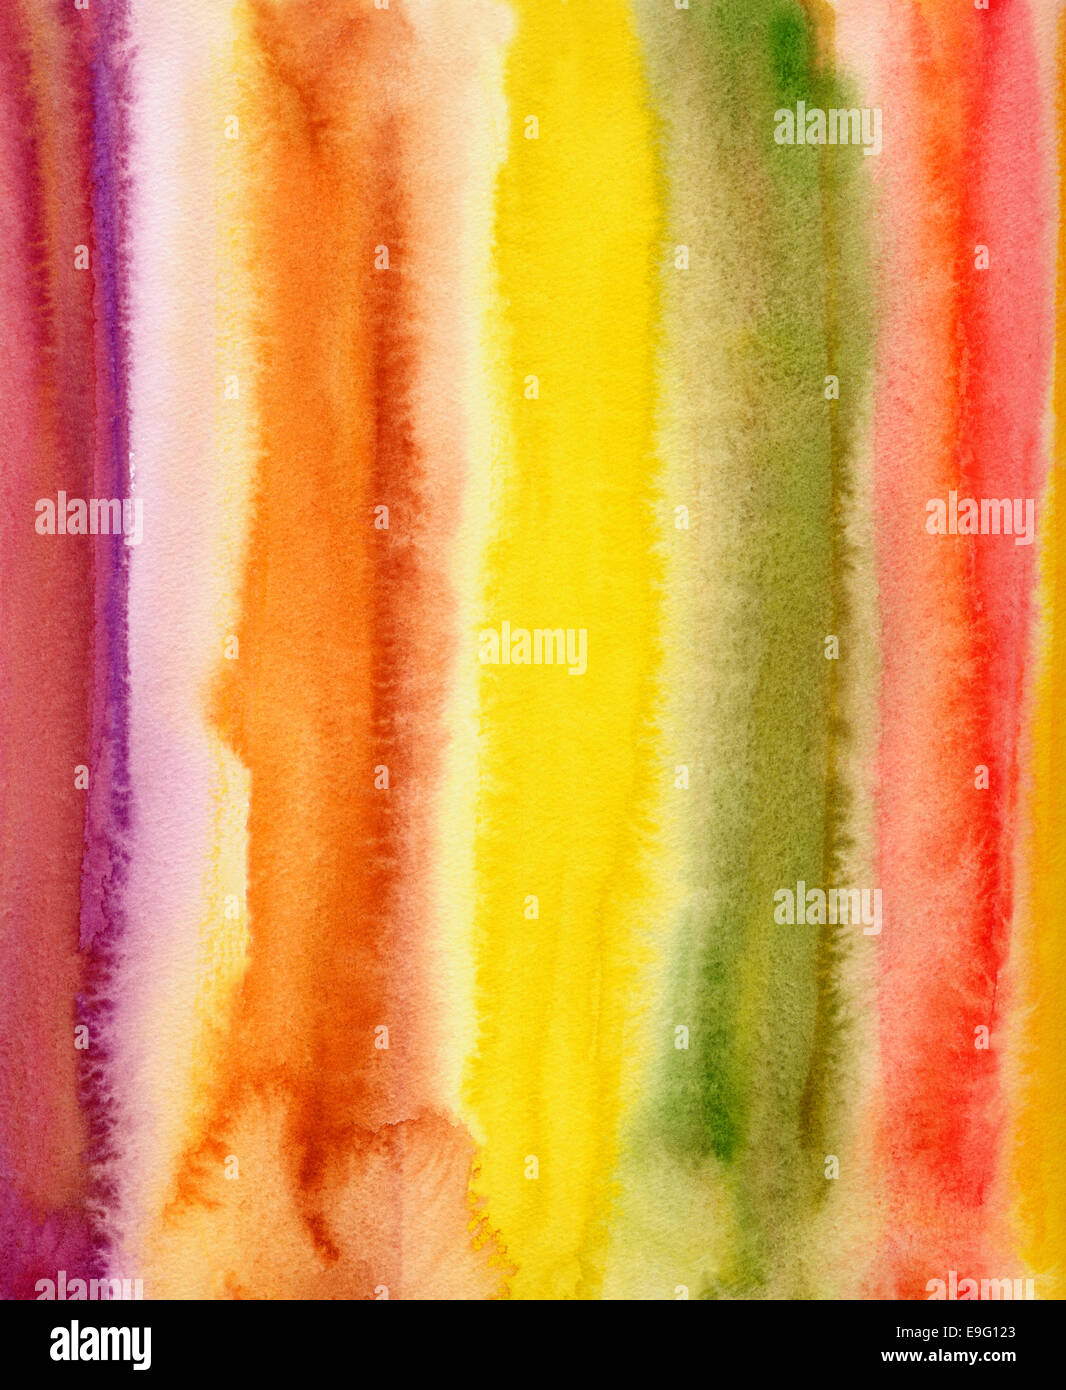 watercolor abstract pattern Stock Photo